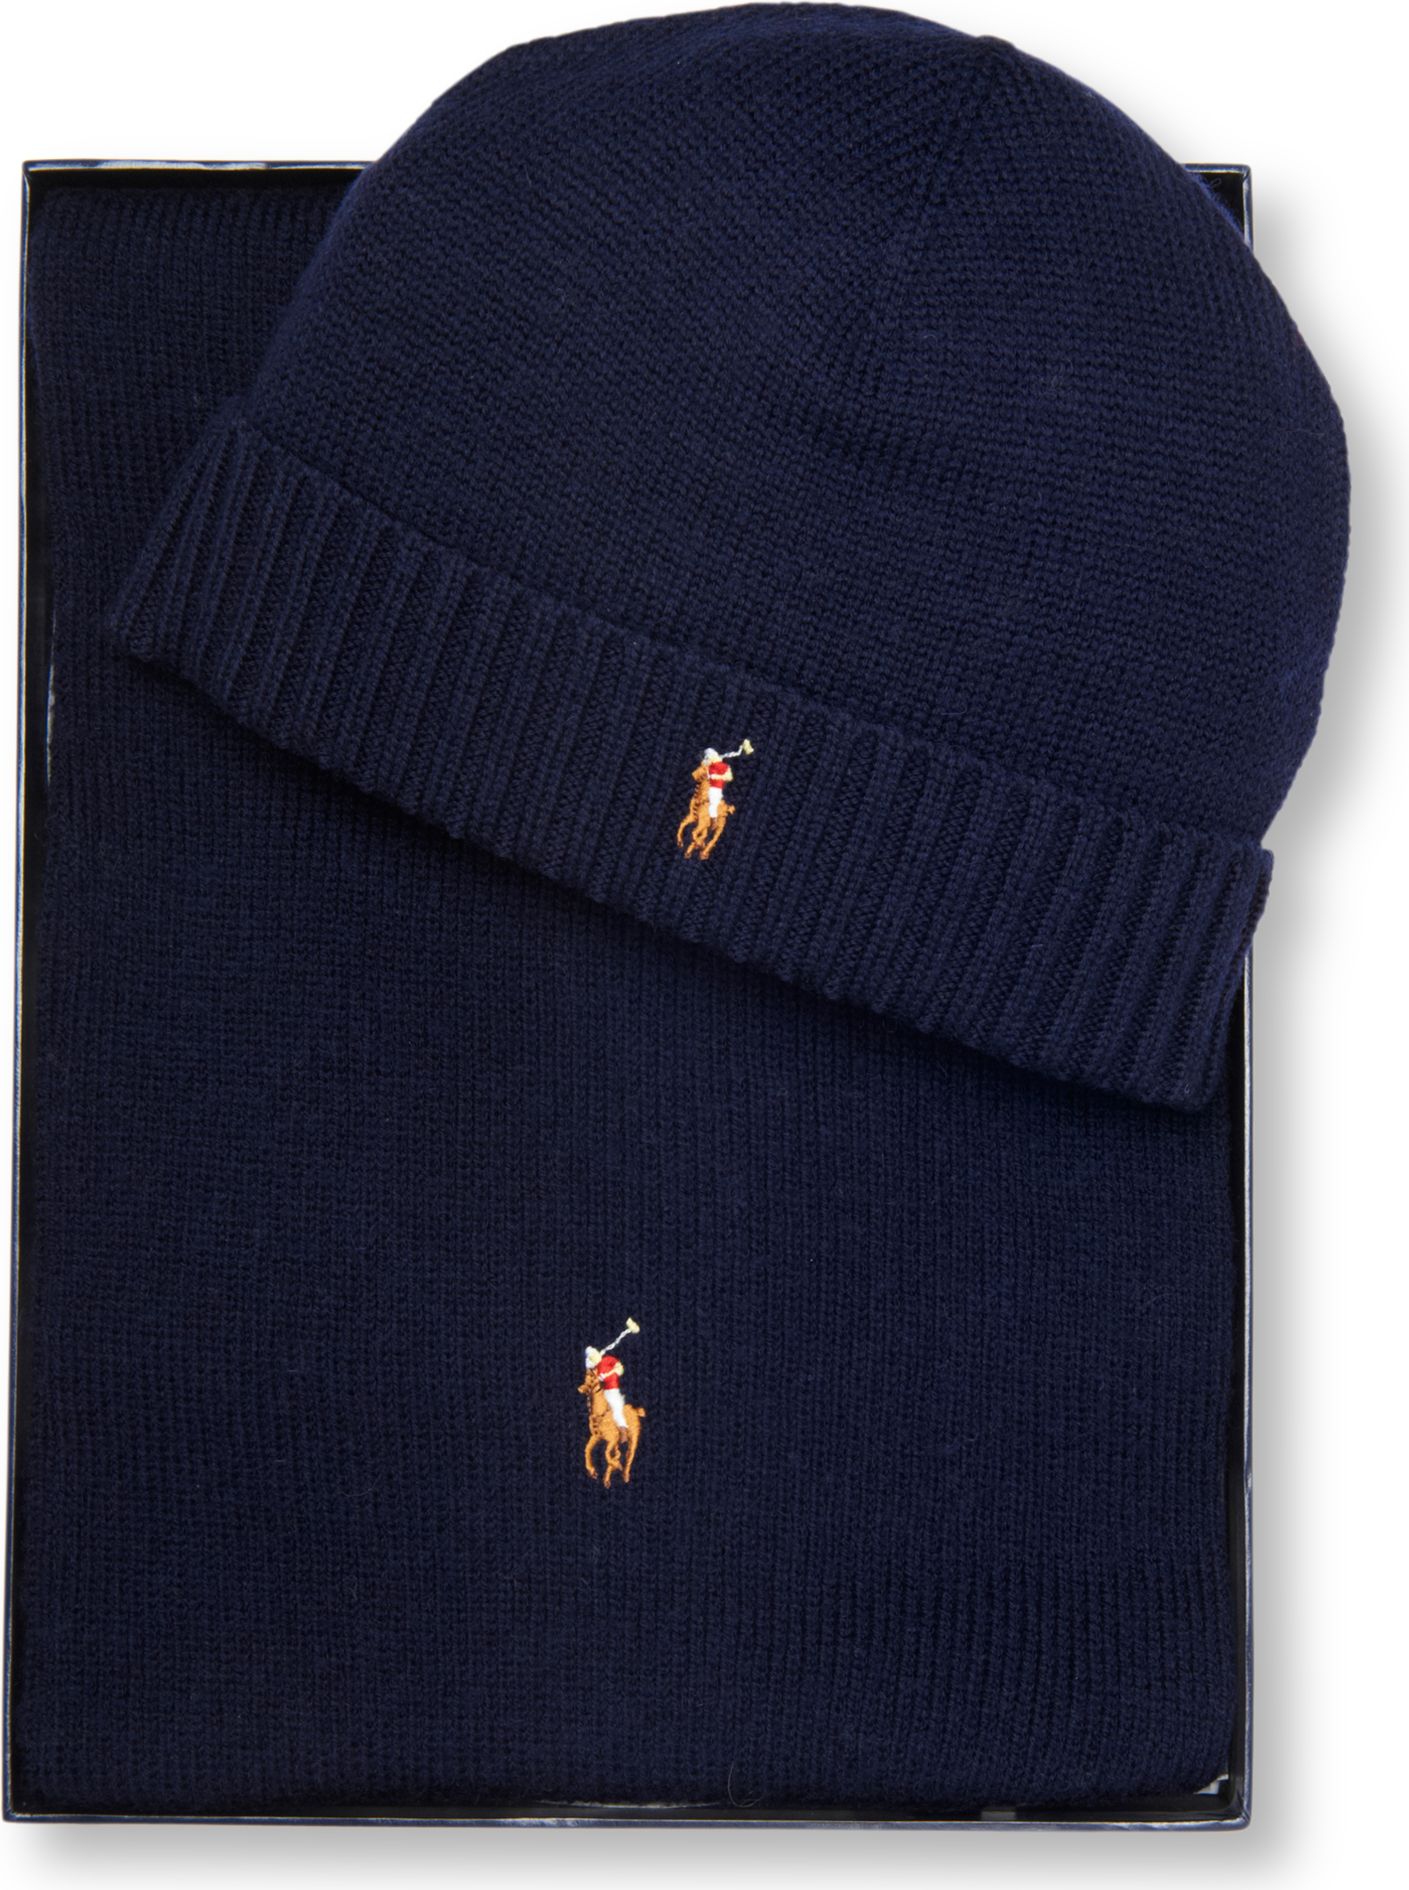 polo hat and glove set